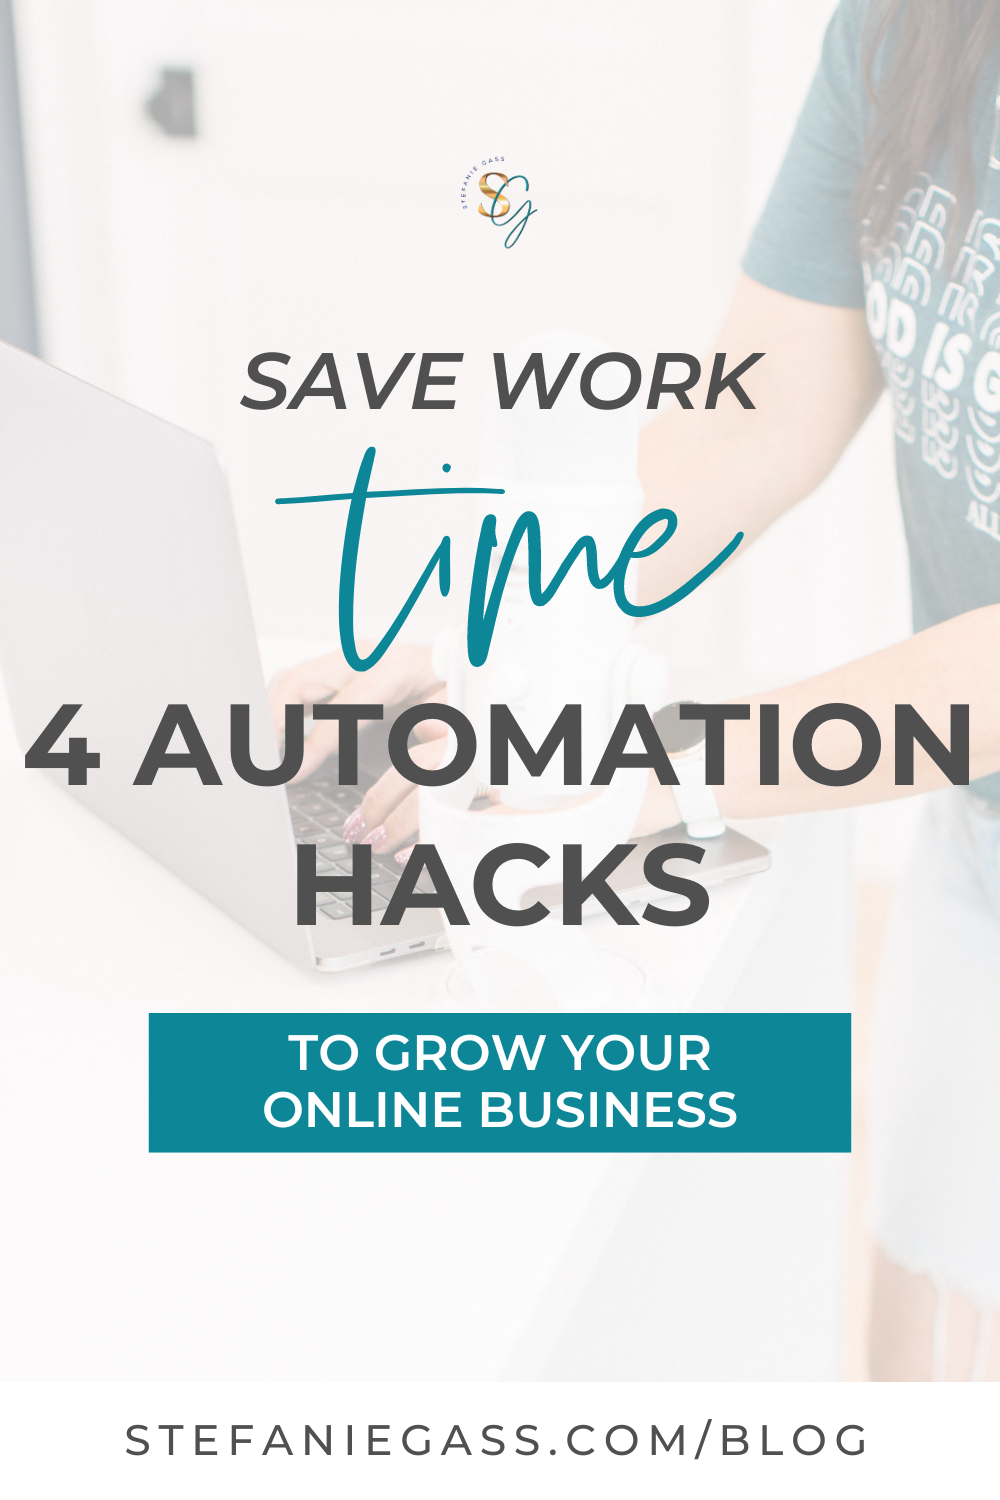 Save work time: 4 automation hacks to grow your online business